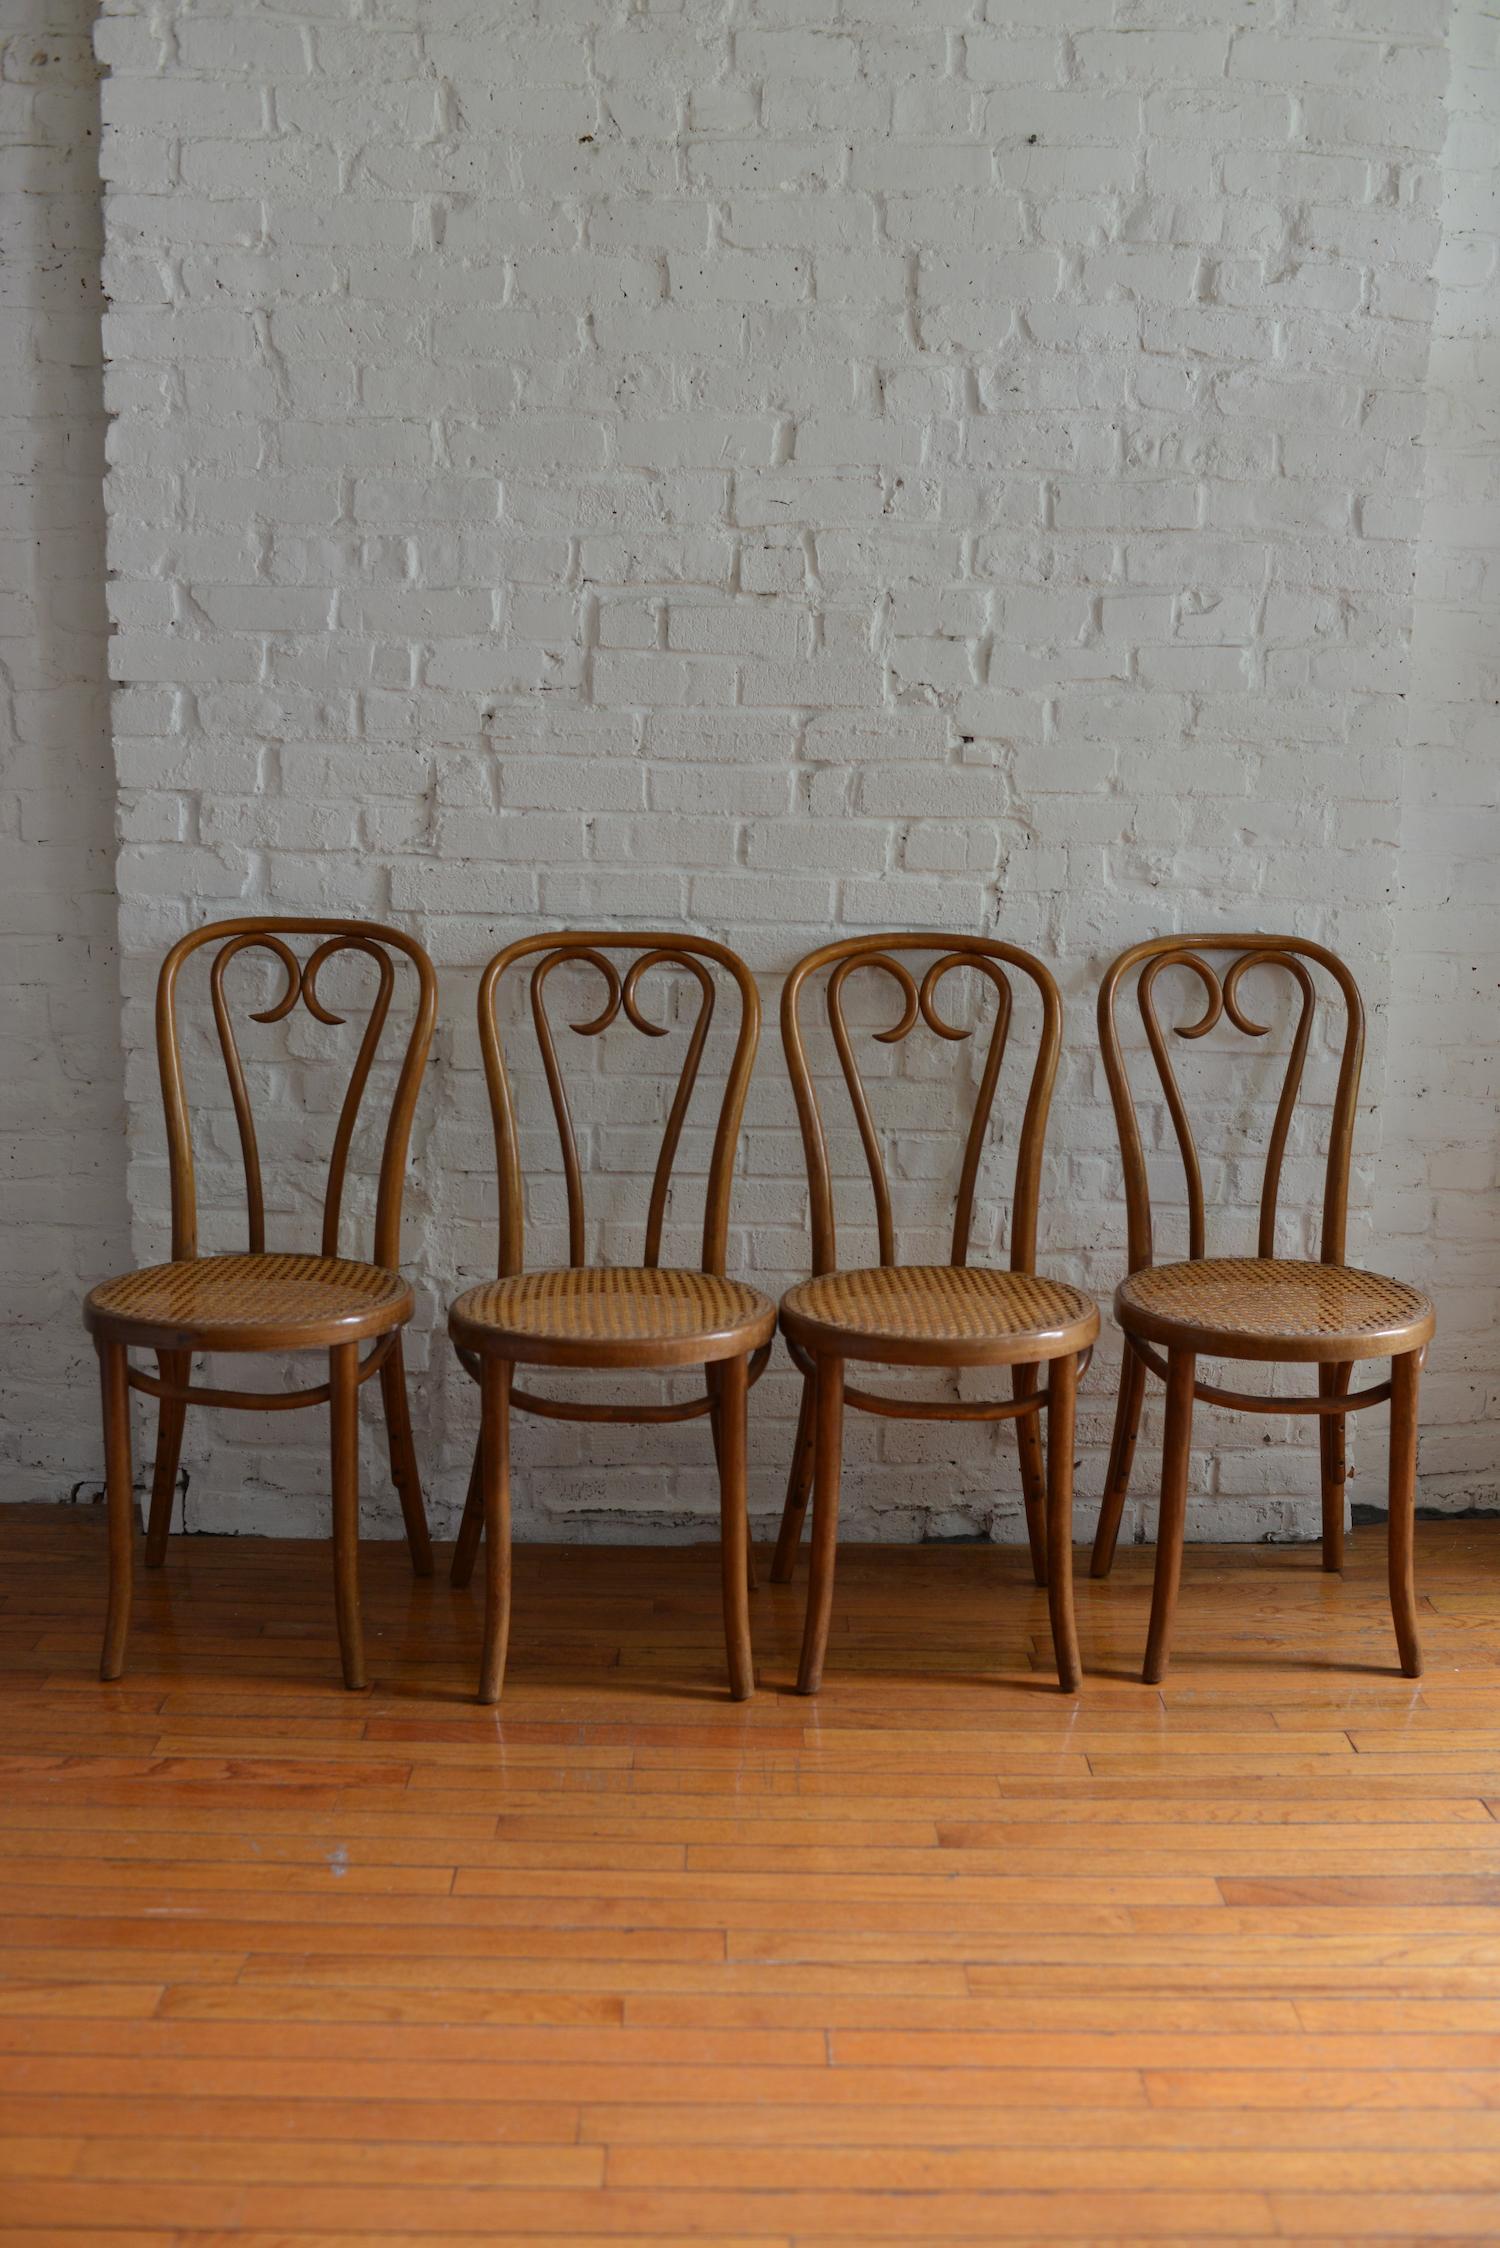 Set of four vintage No. 16 Bentwood chairs by Michael Thonet for ZPM Radomsko. Often referred to as the Sweetheart chair, this set was designed by Michael Thonet and produced by ZPM Rodomsko in Poland, which was a former Thonet factory until it was